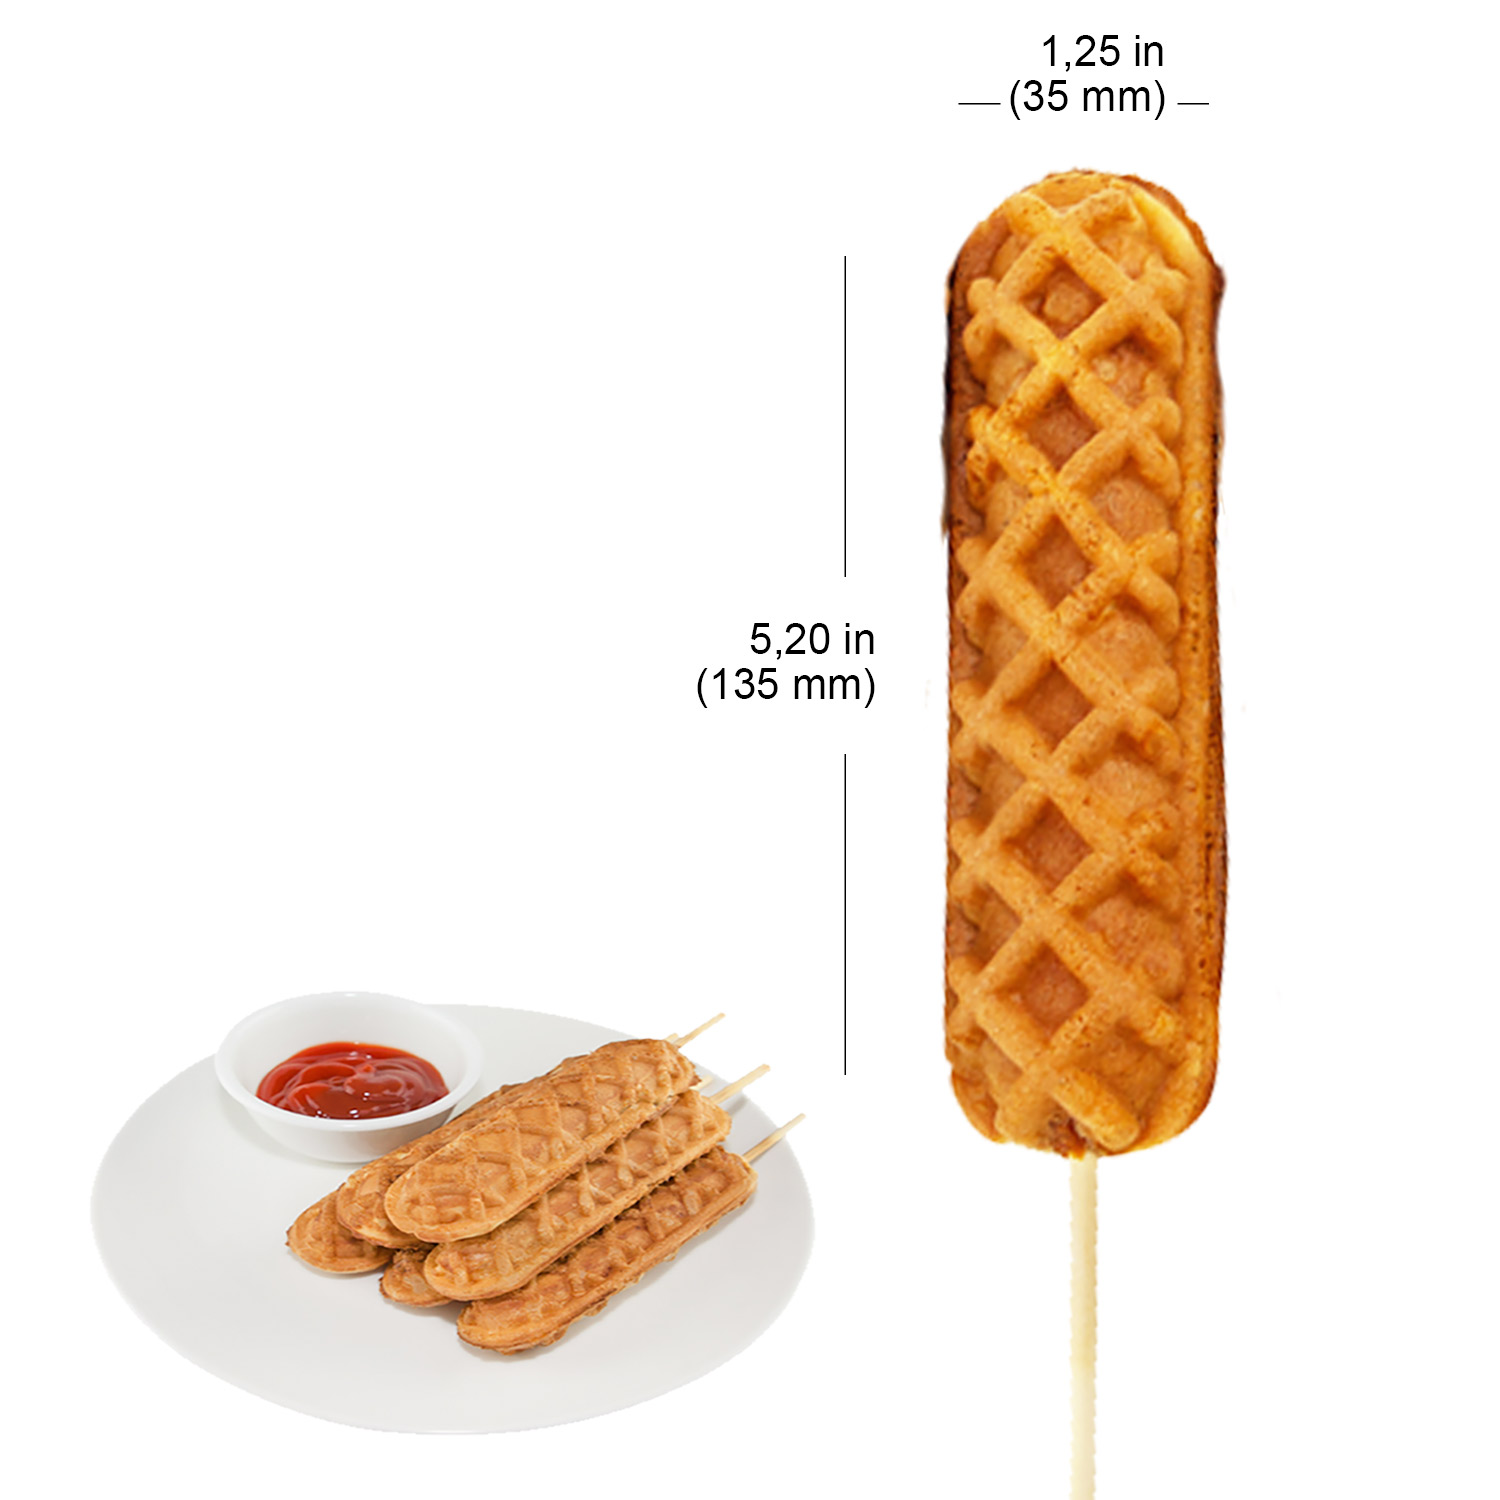 Hanchen Instrument FY-117 Commercial Use Electric Corn Dog Lolly French Hot Dog Muffin Waffle Maker Baker Iron Fryer 110V